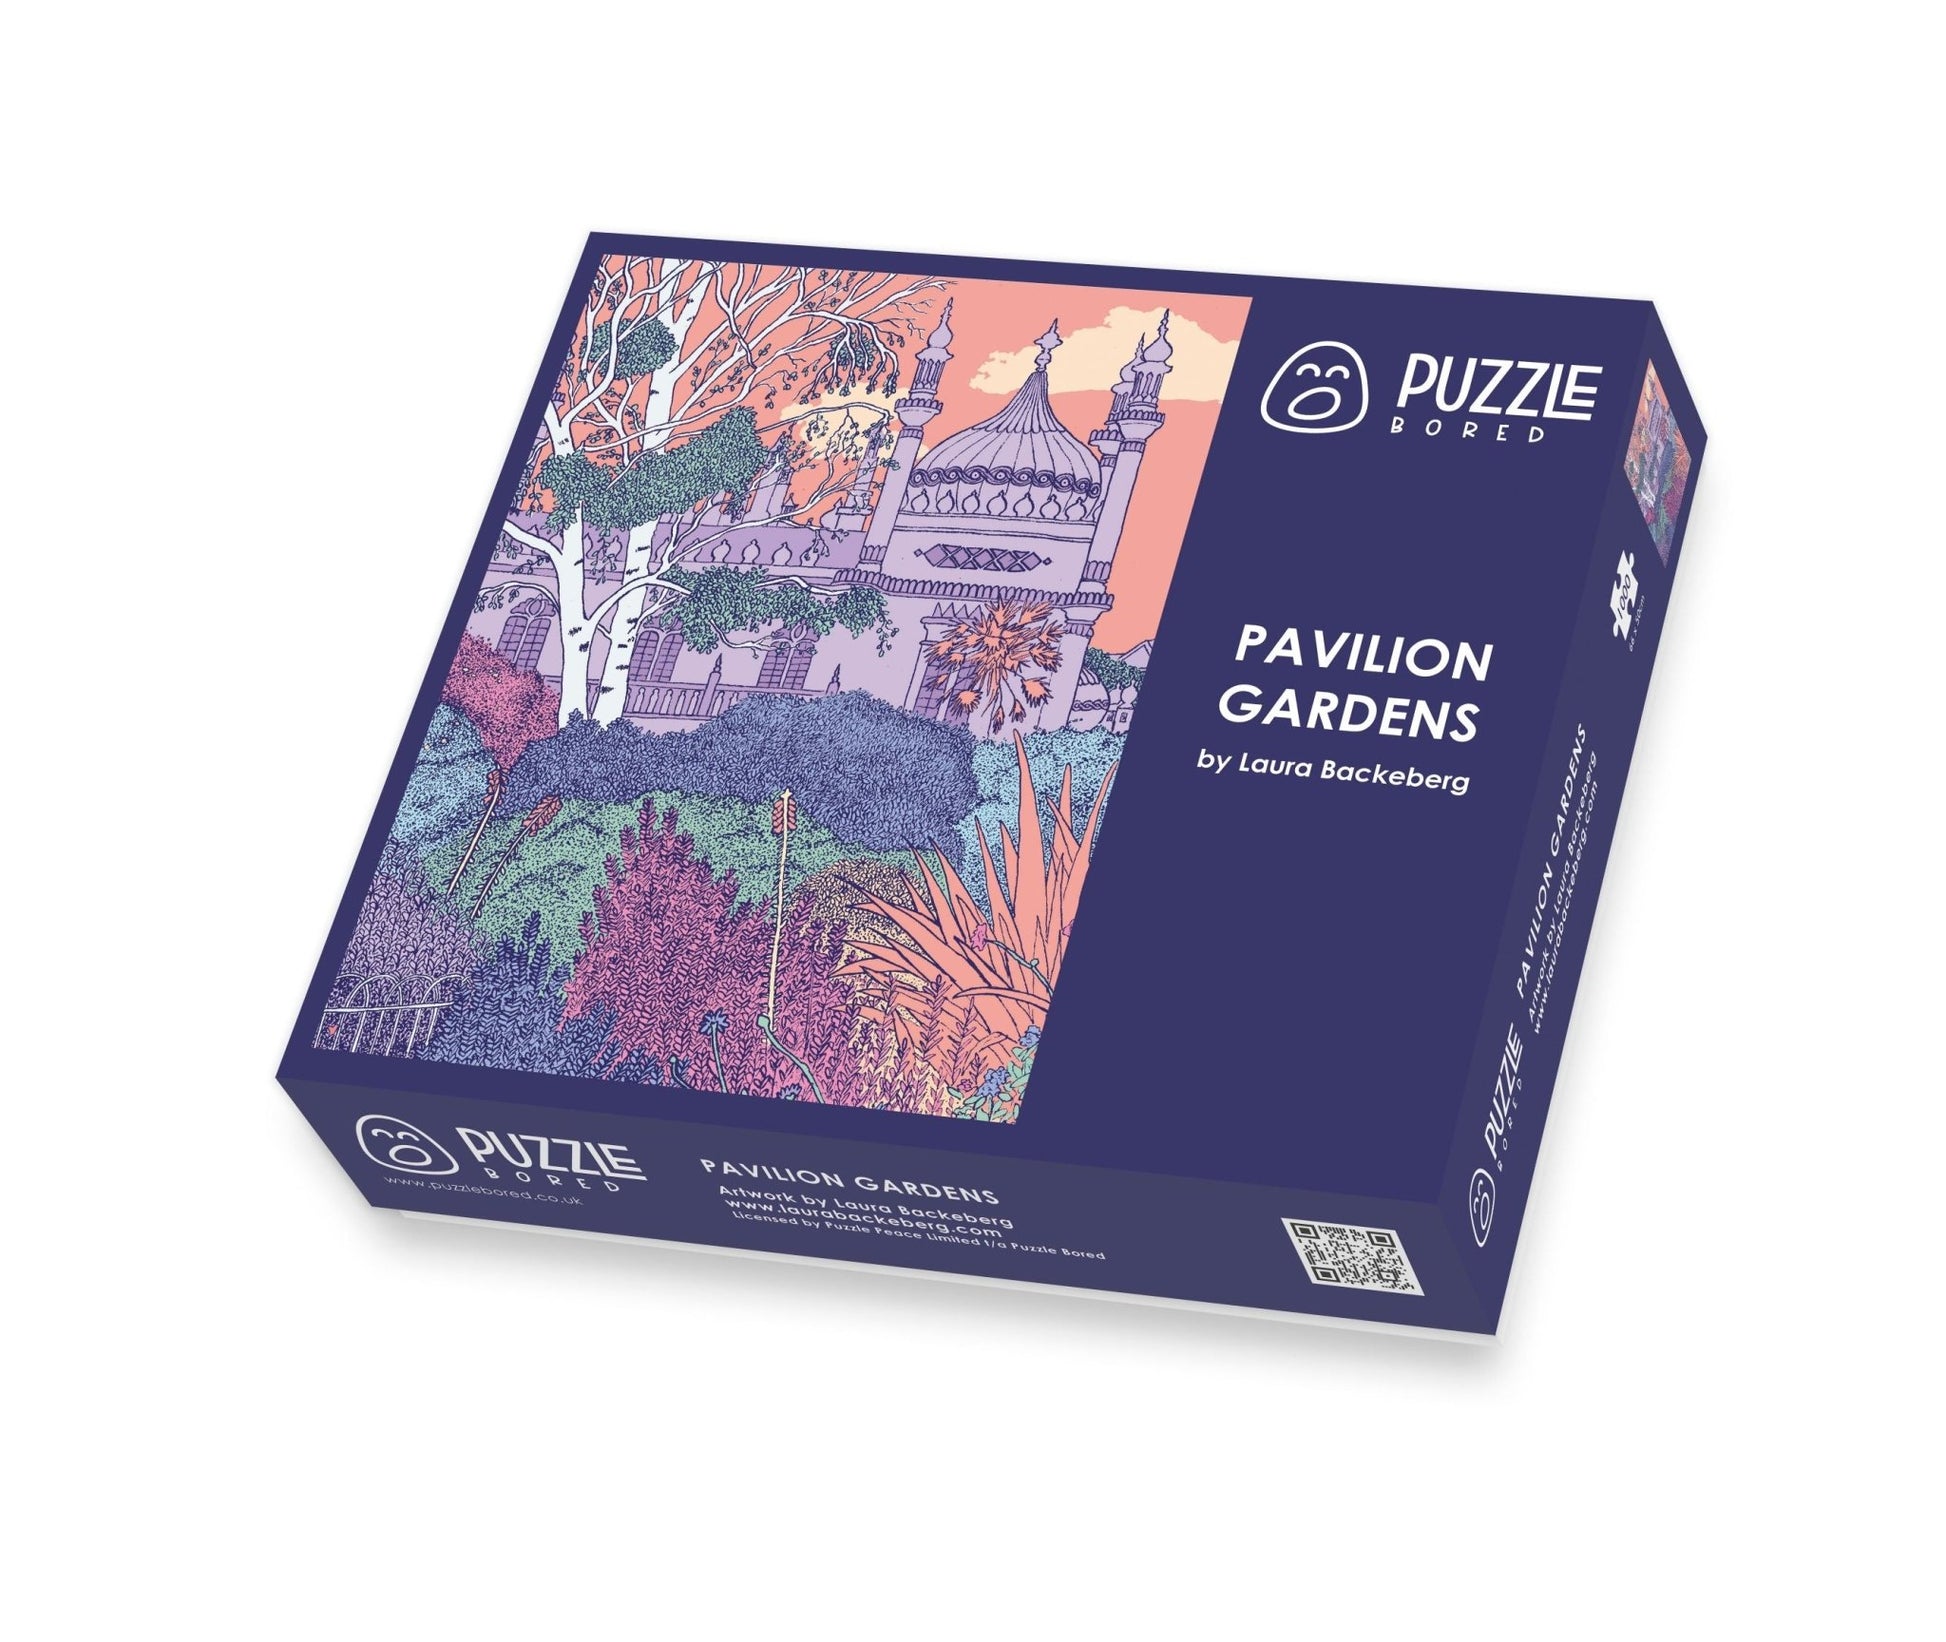 Pavilion Gardens by Laura Backeberg - Puzzle Bored